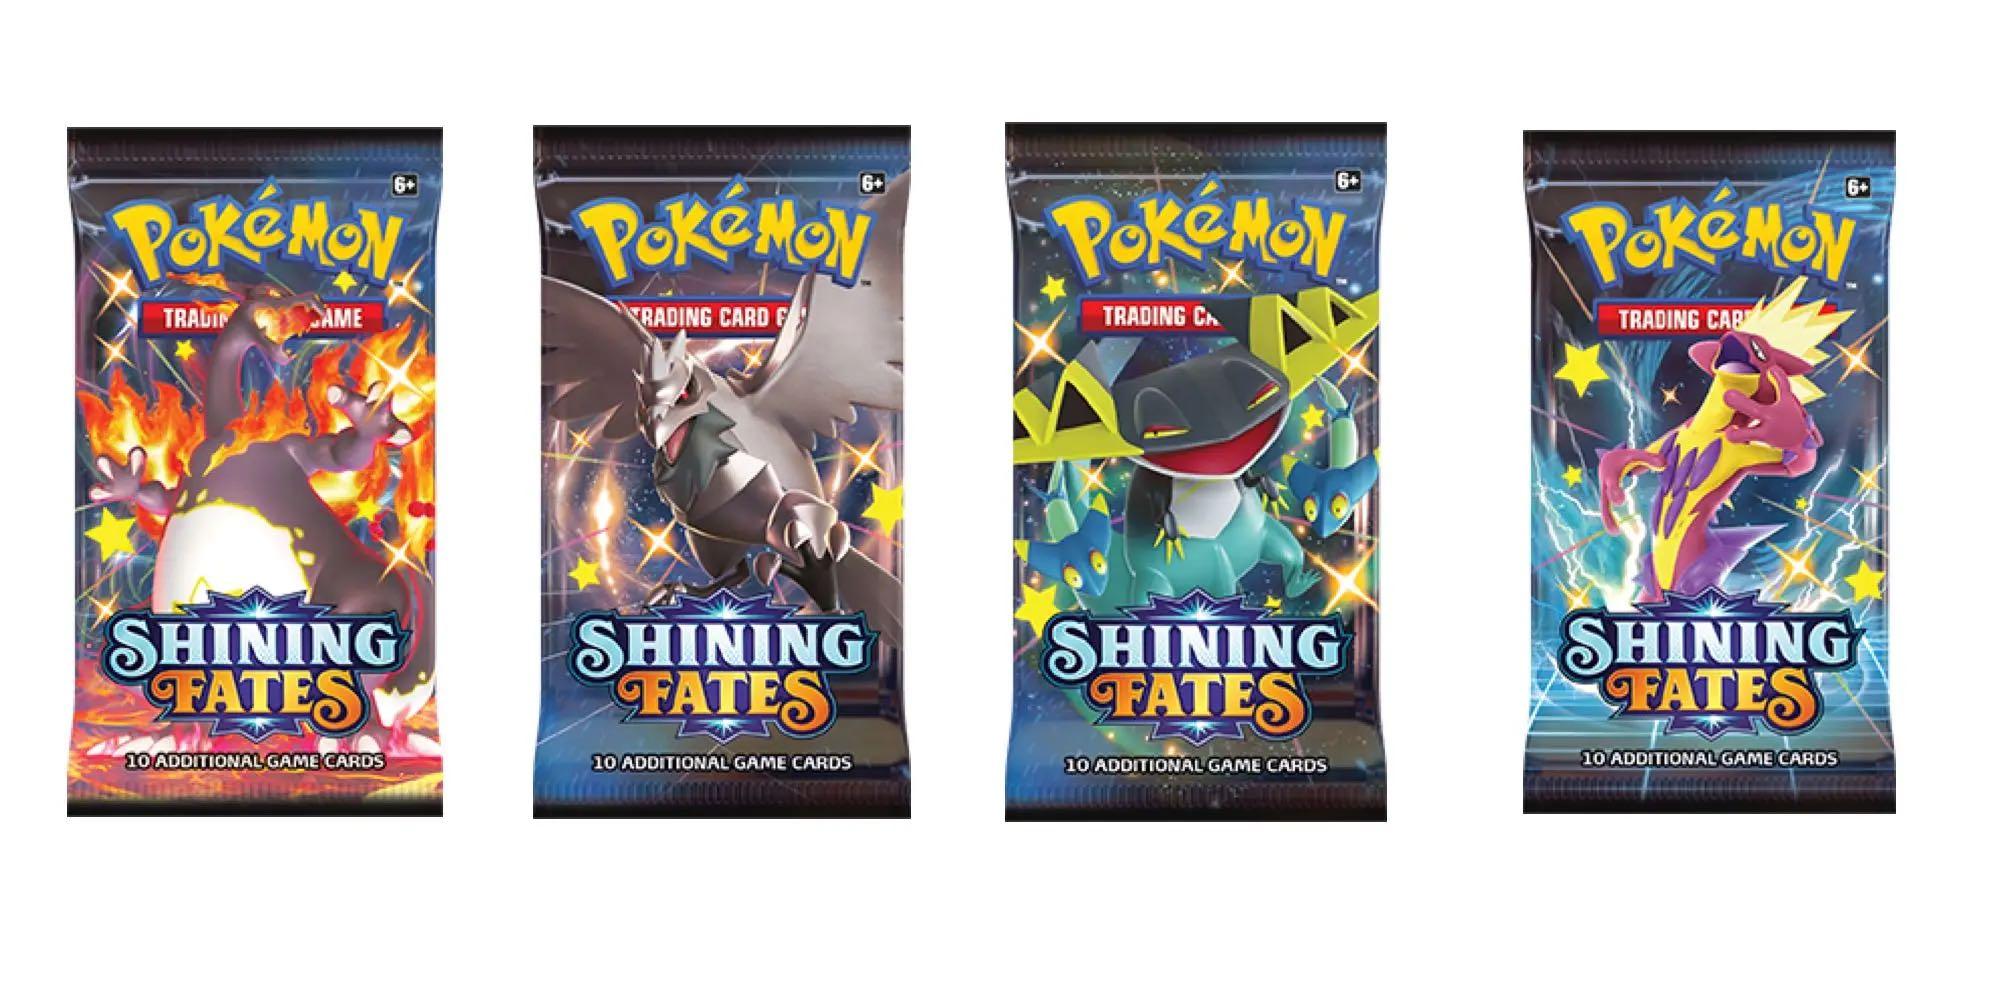 1x Shining Fates Booster Pack Pokemon TCG BRAND NEW FACTORY SEALED 